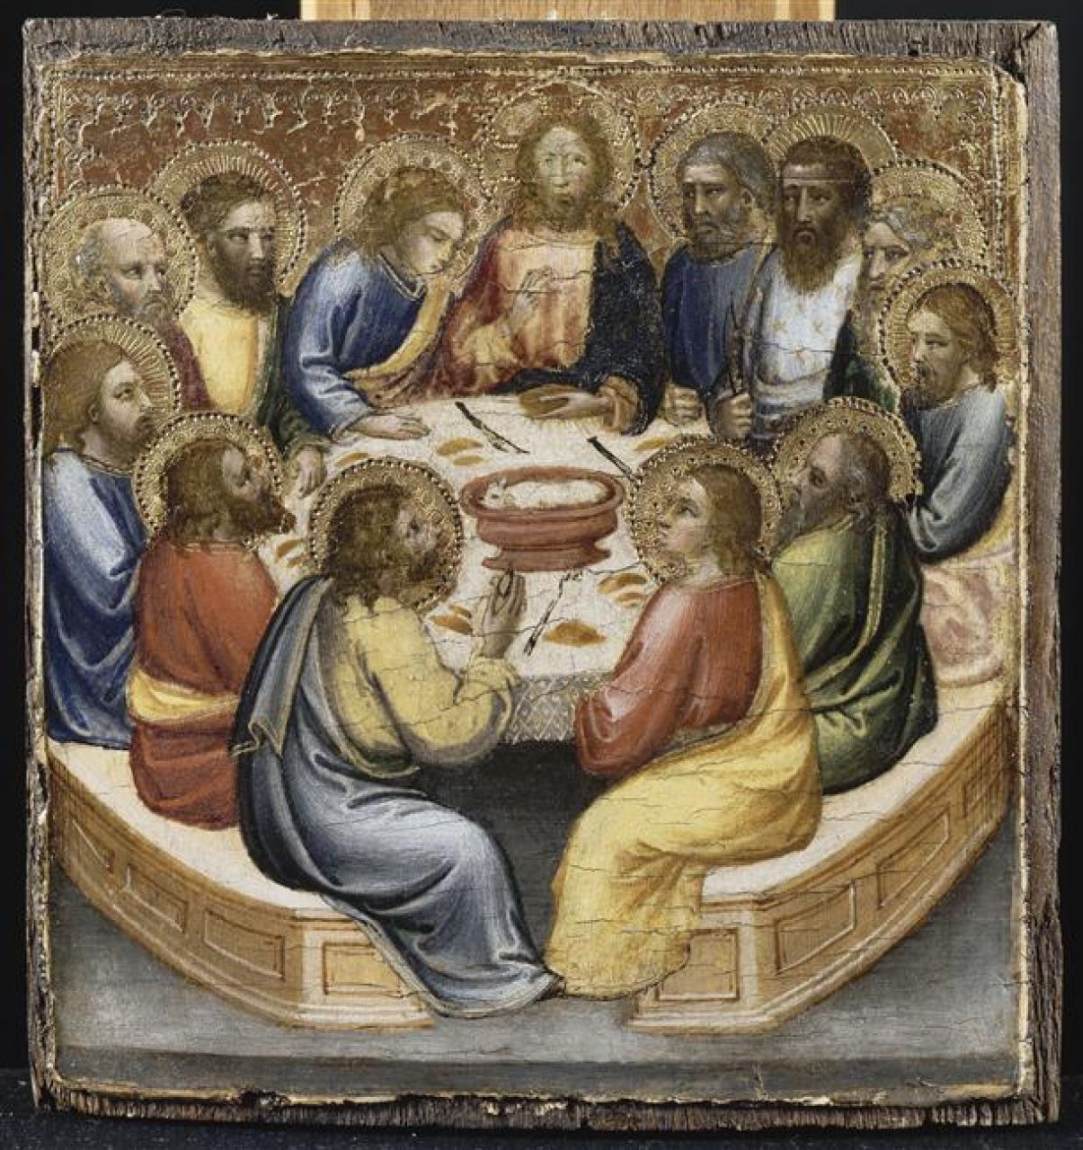 Scenes from the Life of Christ: The Last Supper